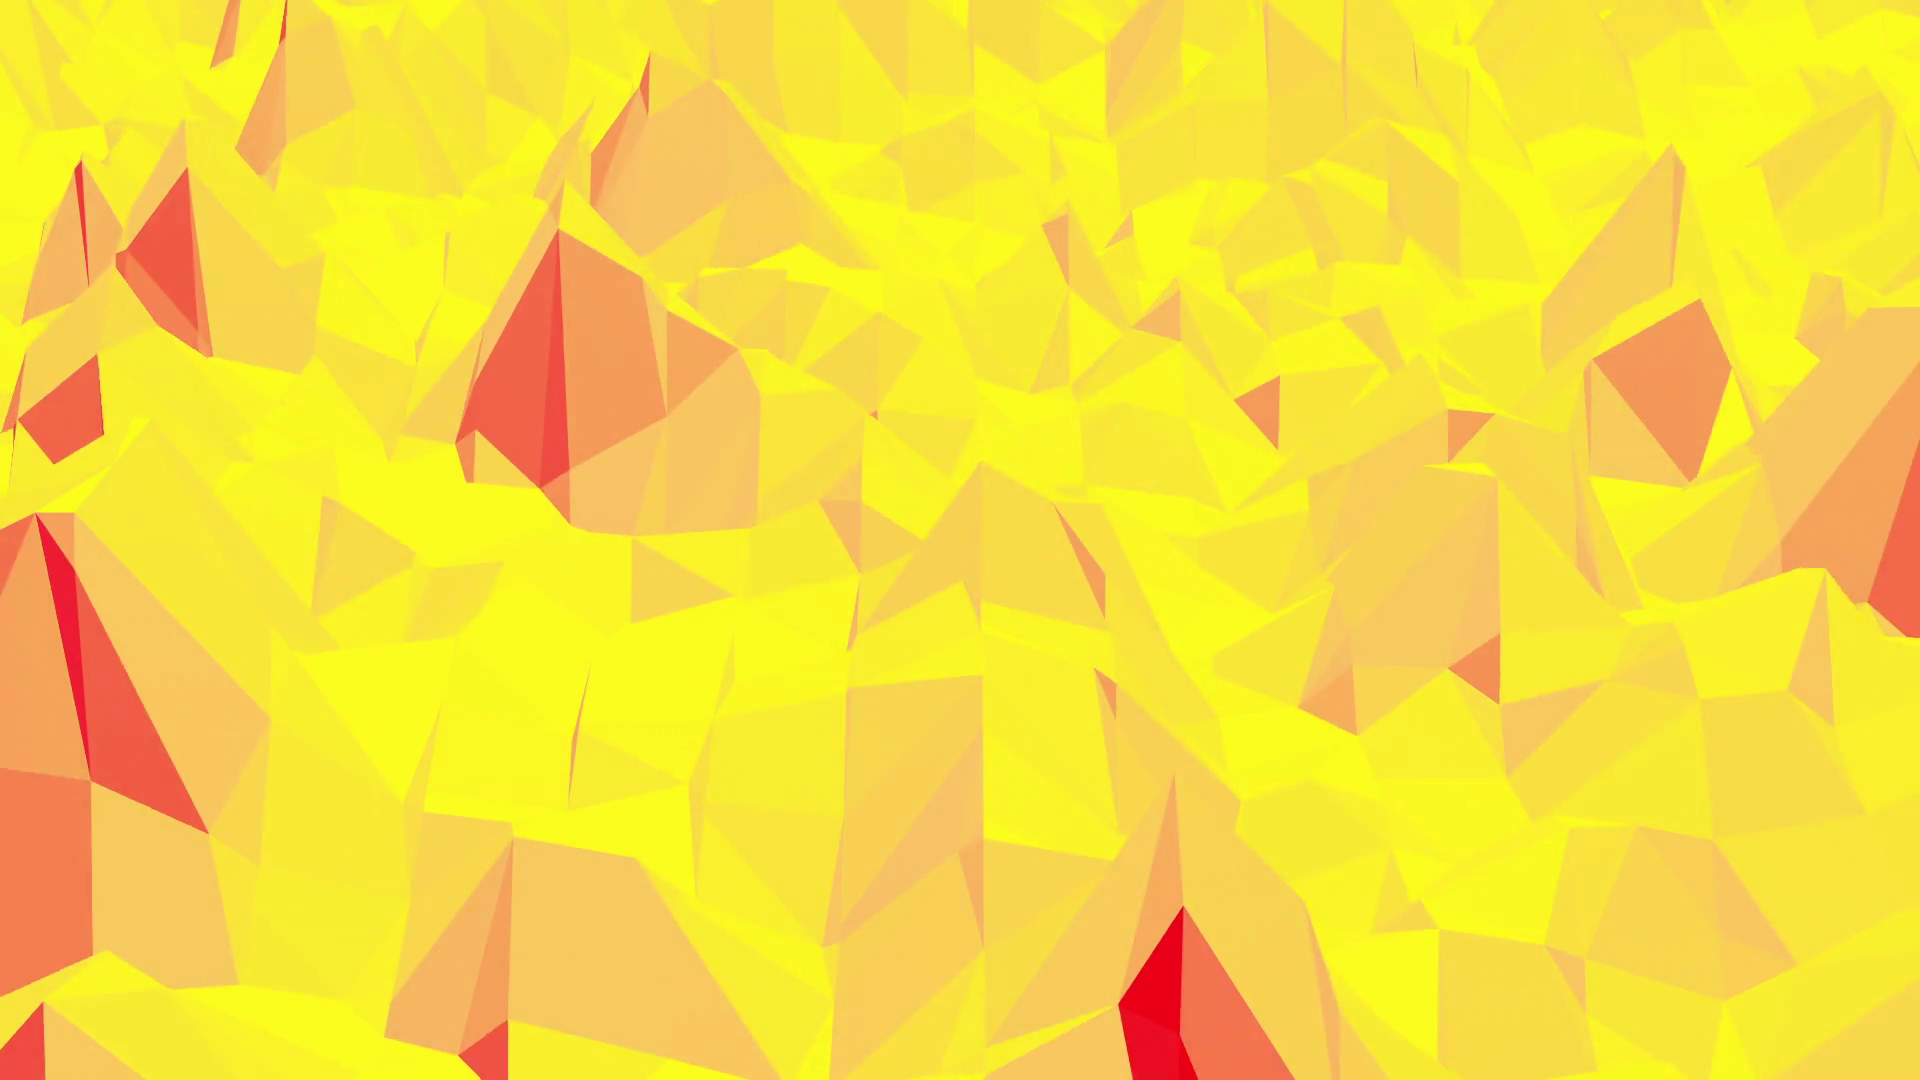 Yellow low poly background oscillating. Abstract low poly surface as ...